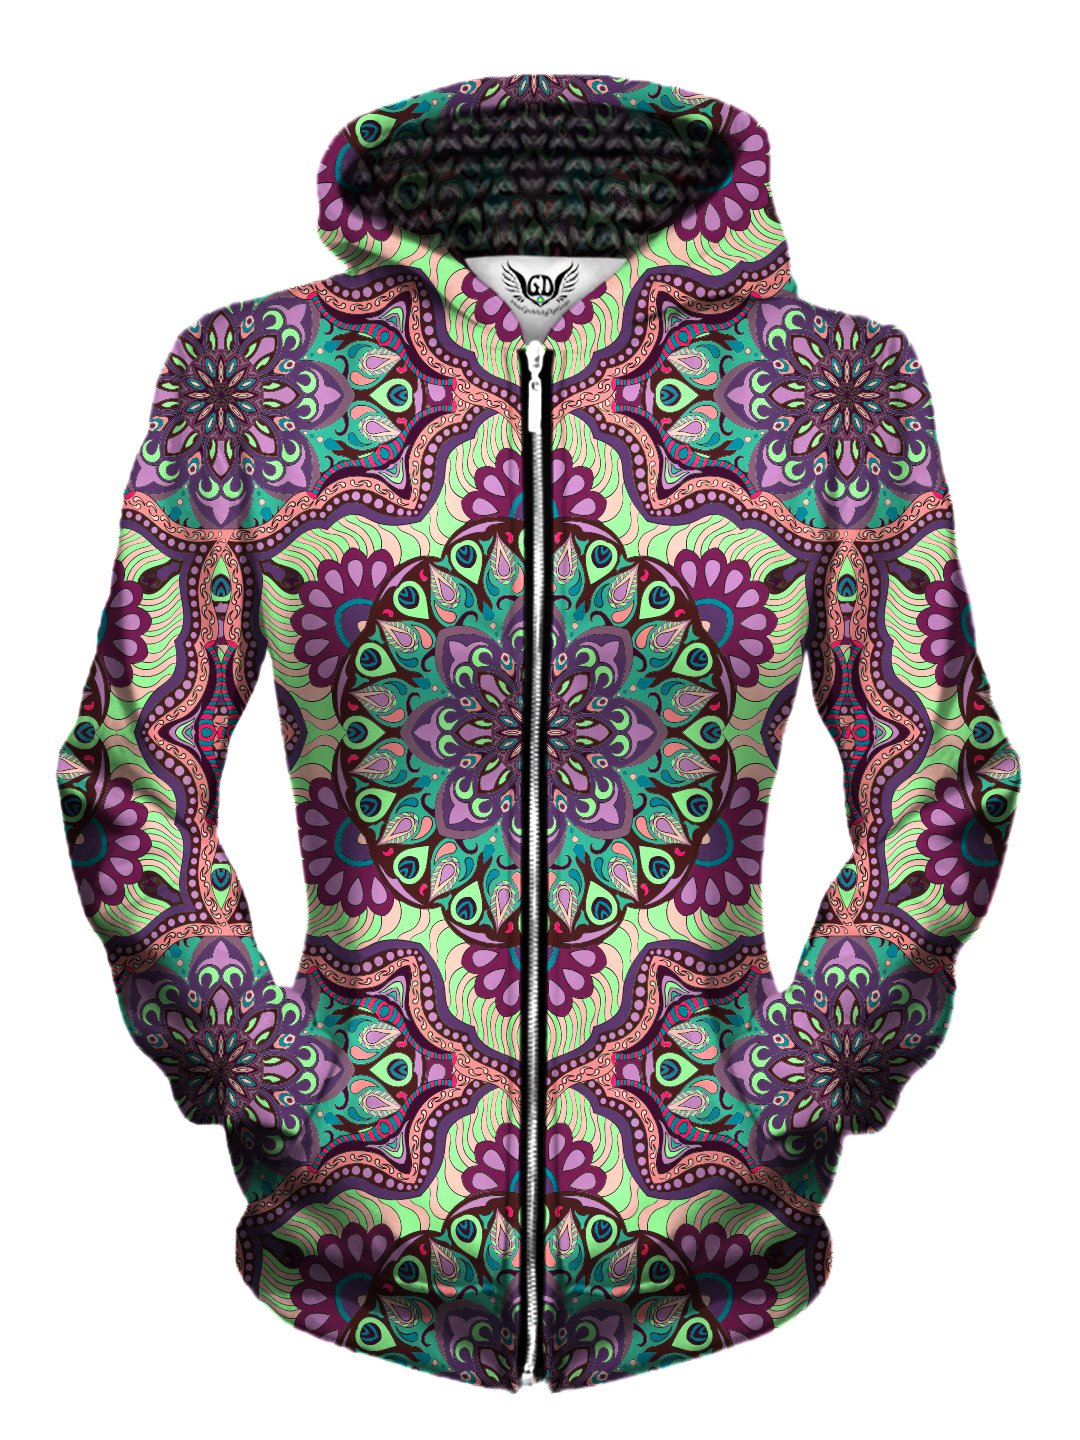 Front view of women's all over print psychedelic sacred geometry zip up hoody by Gratefully Dyed Apparel.